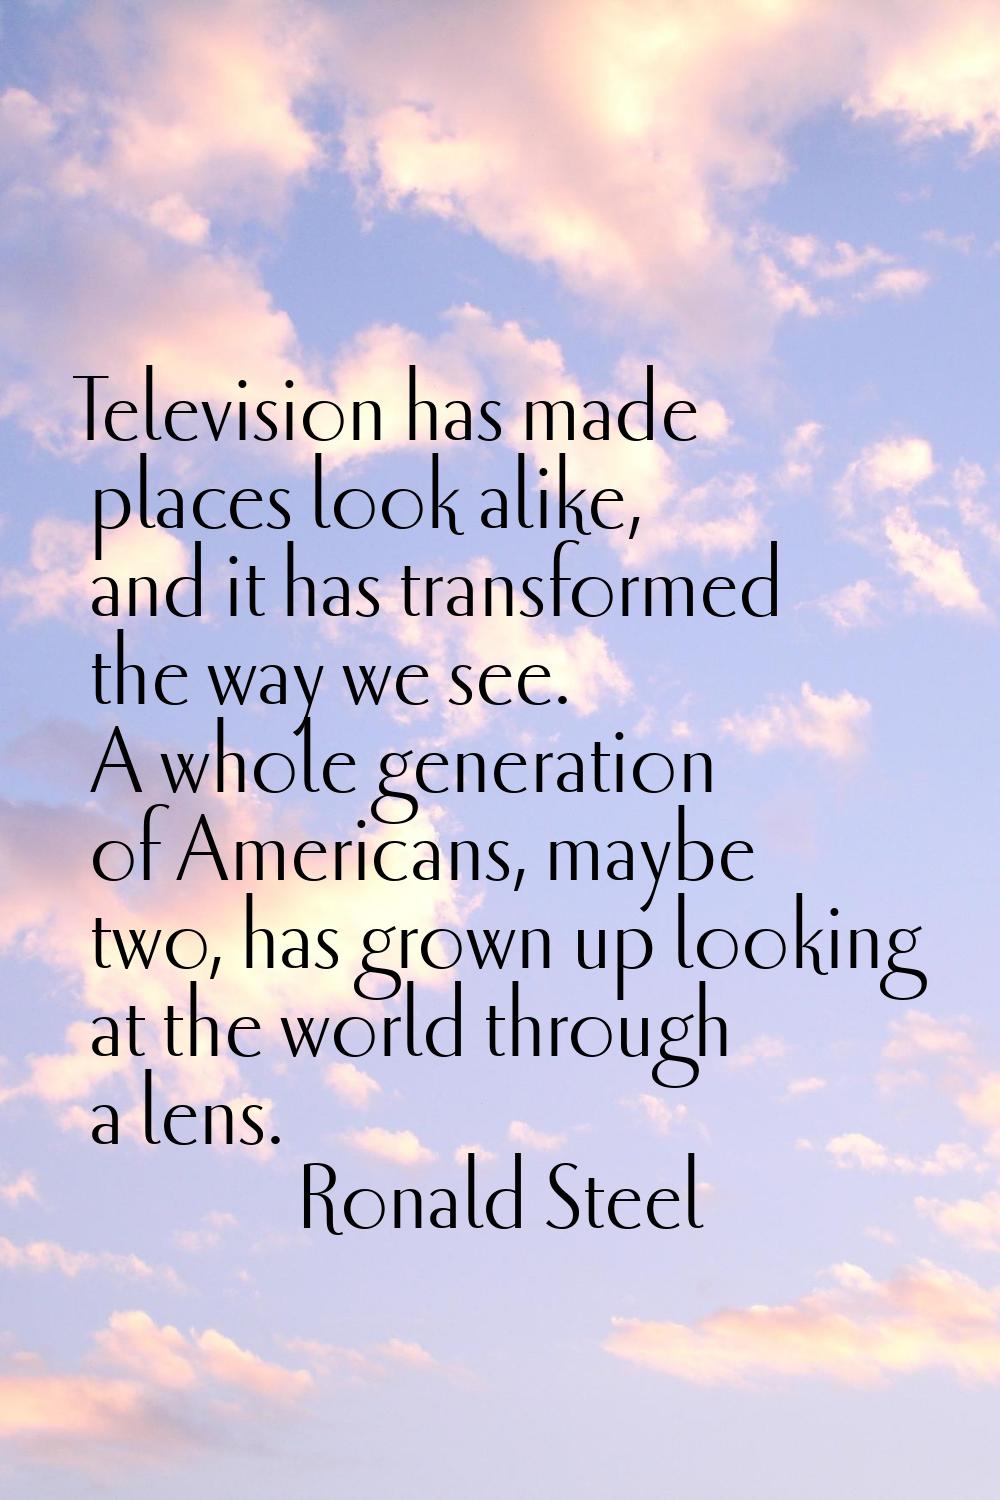 Television has made places look alike, and it has transformed the way we see. A whole generation of